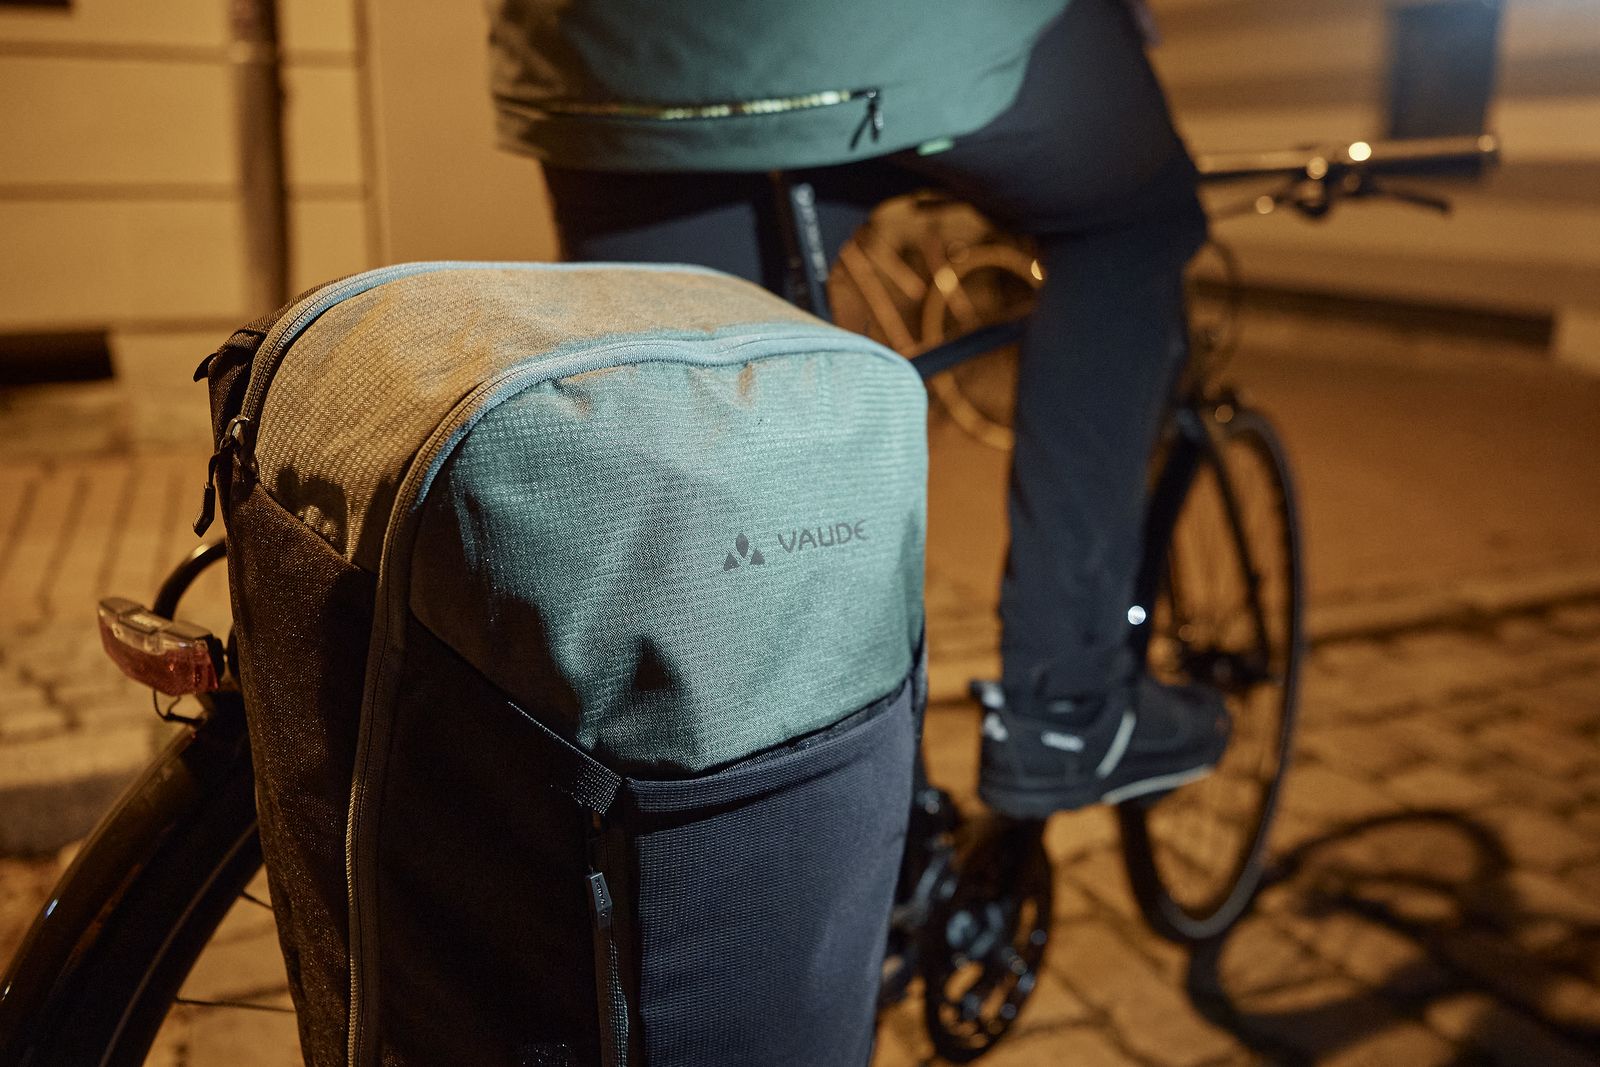 Vaude Cycle 28 II sustainable bike bag made from recycled PET bottles